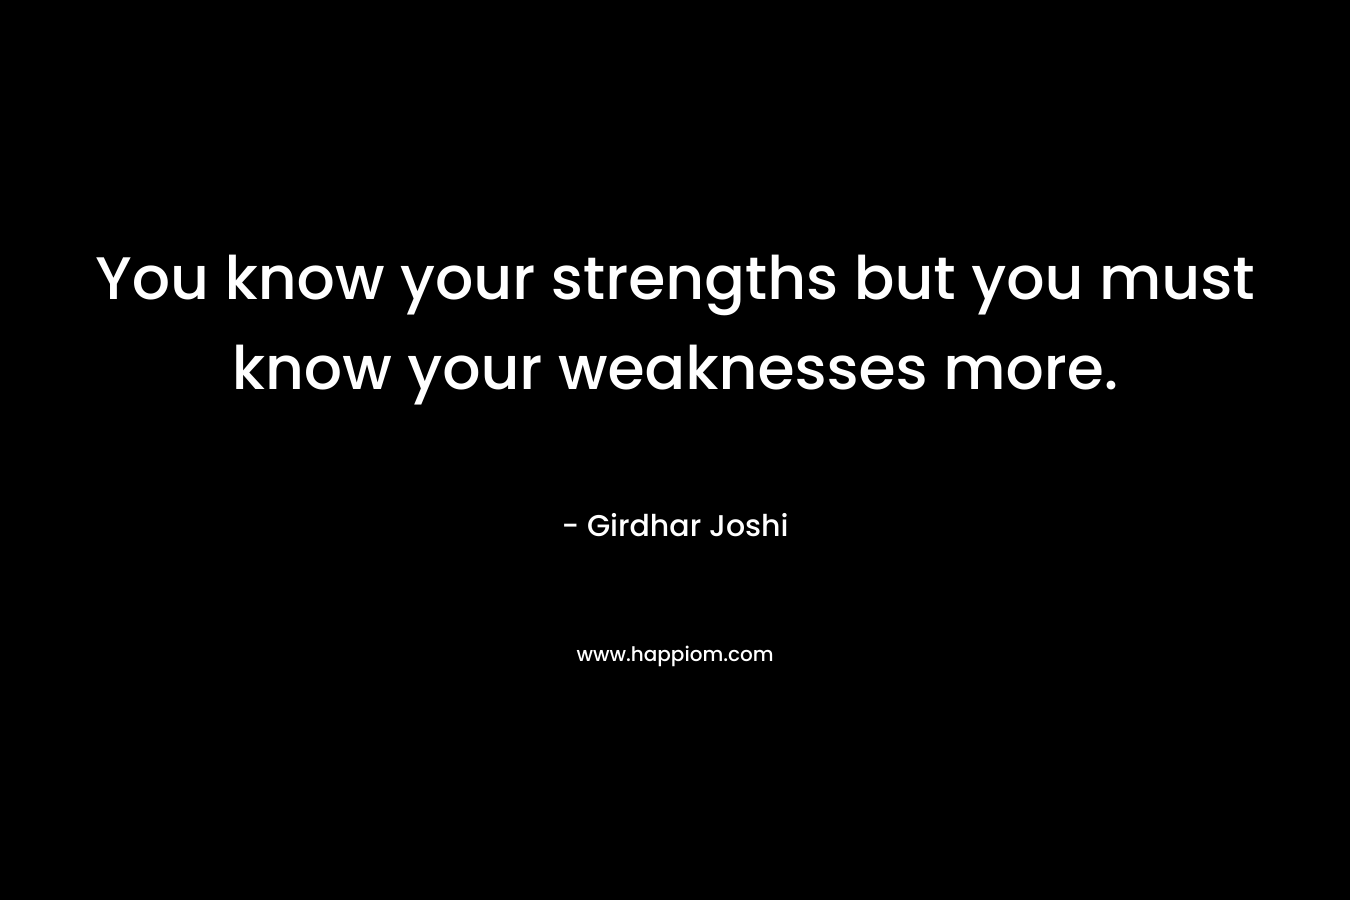 You know your strengths but you must know your weaknesses more.